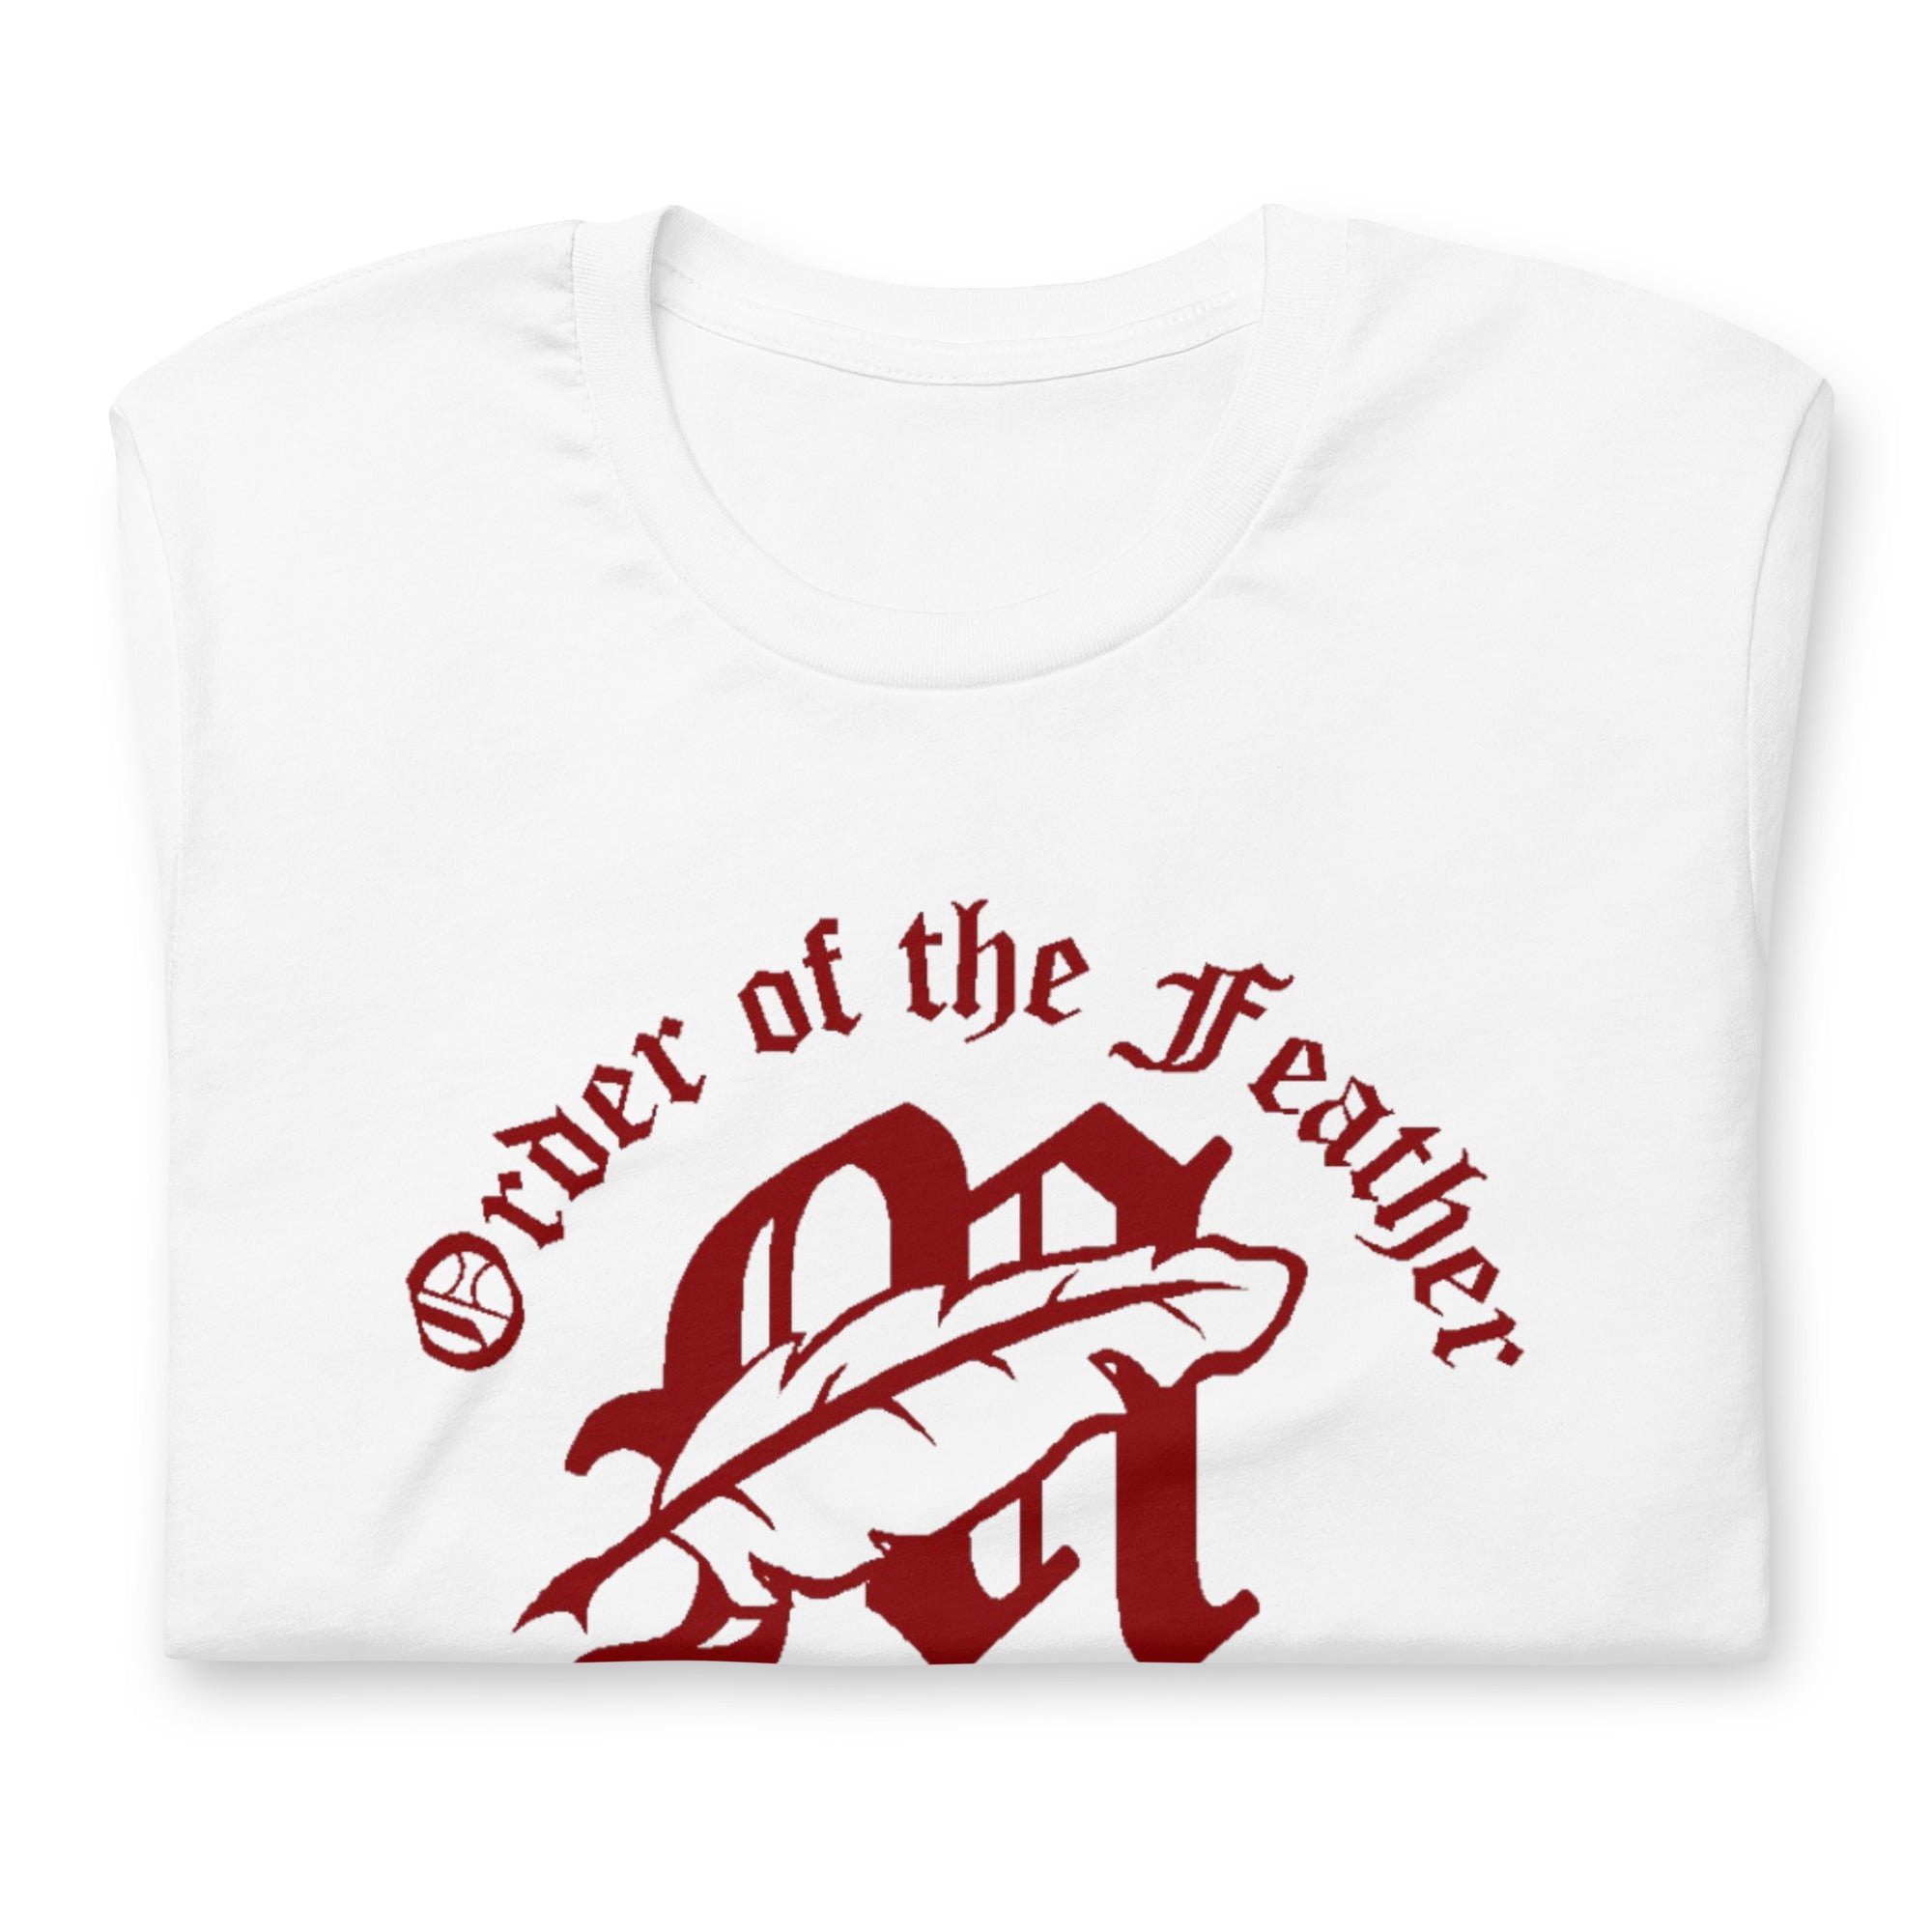 Order of the Feather '70 Unisex t-shirt